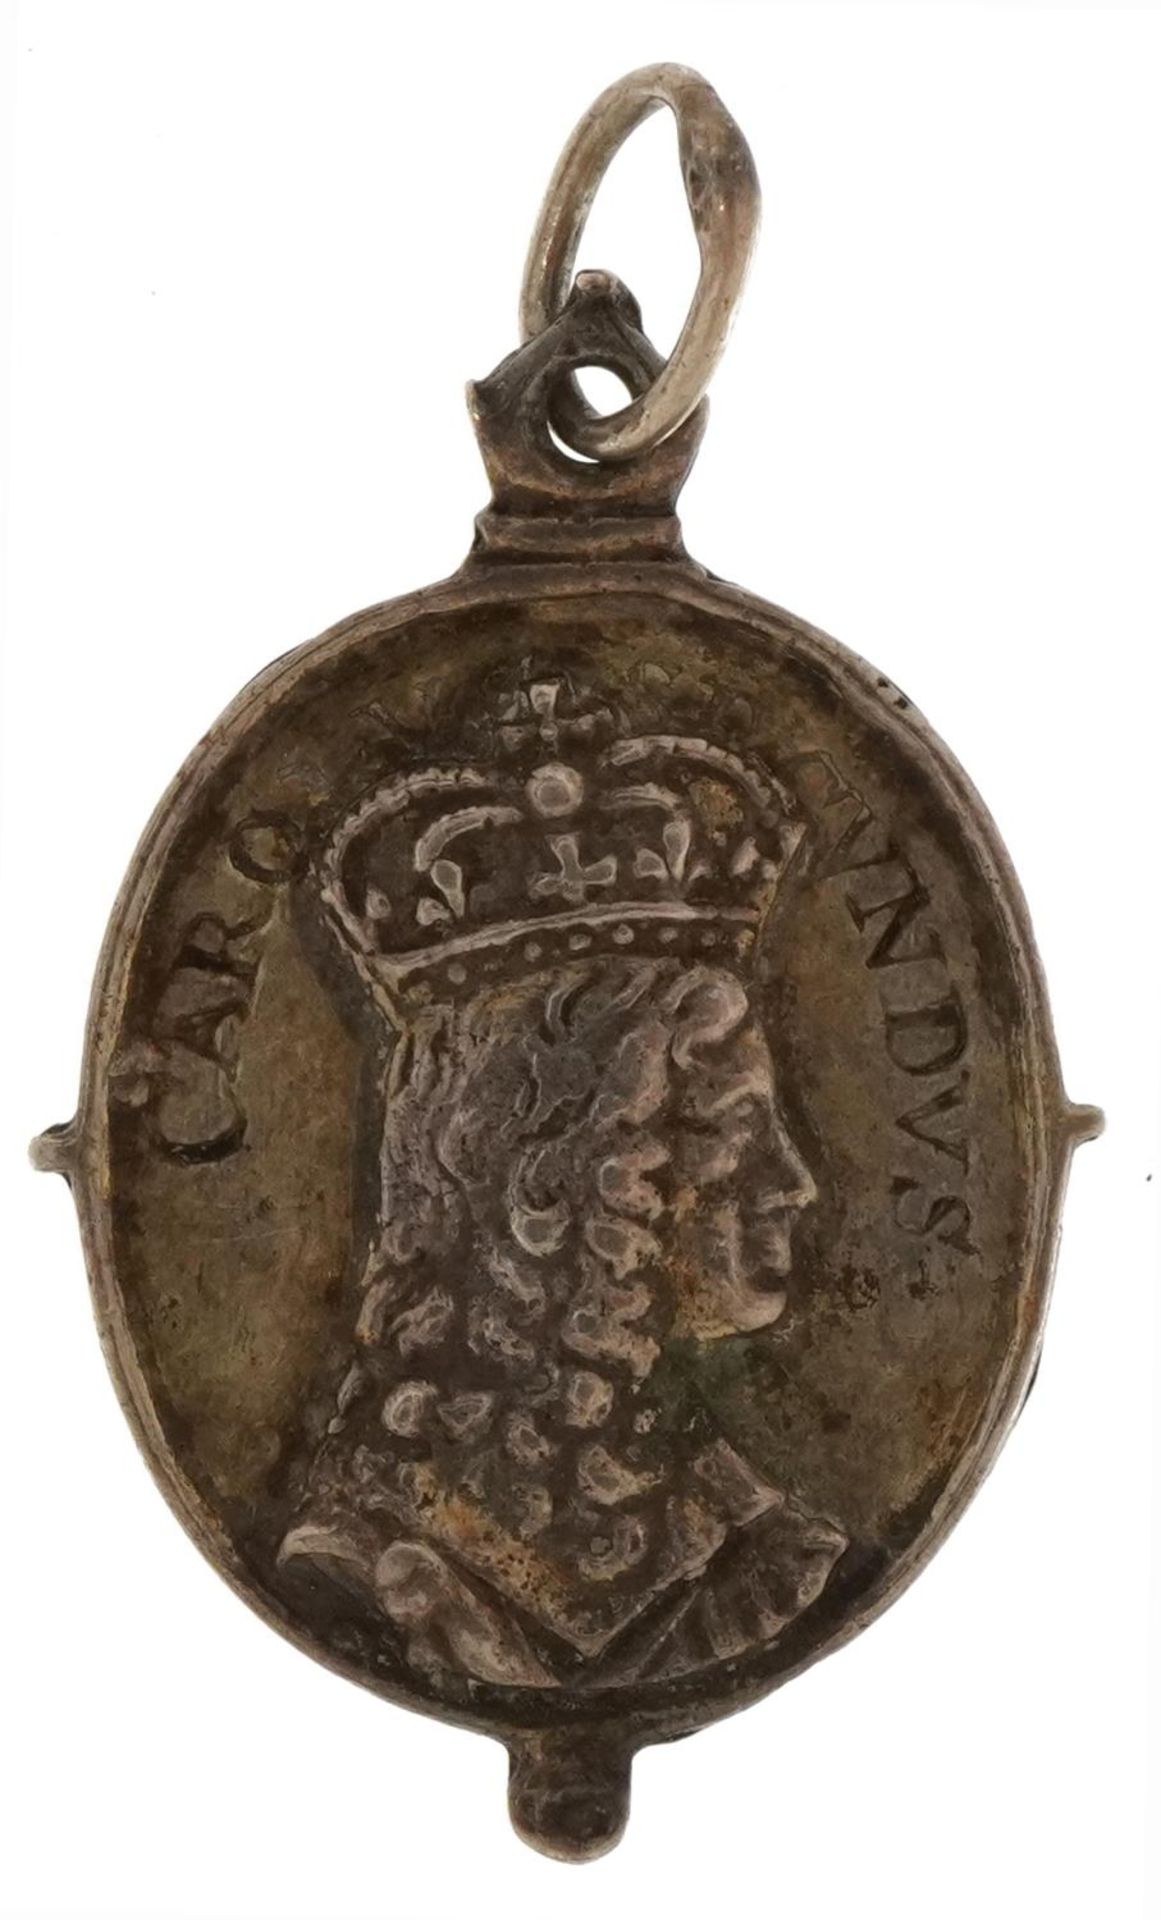 Charles II unmarked silver Royalist badge, 3cm high : For further information on this lot please